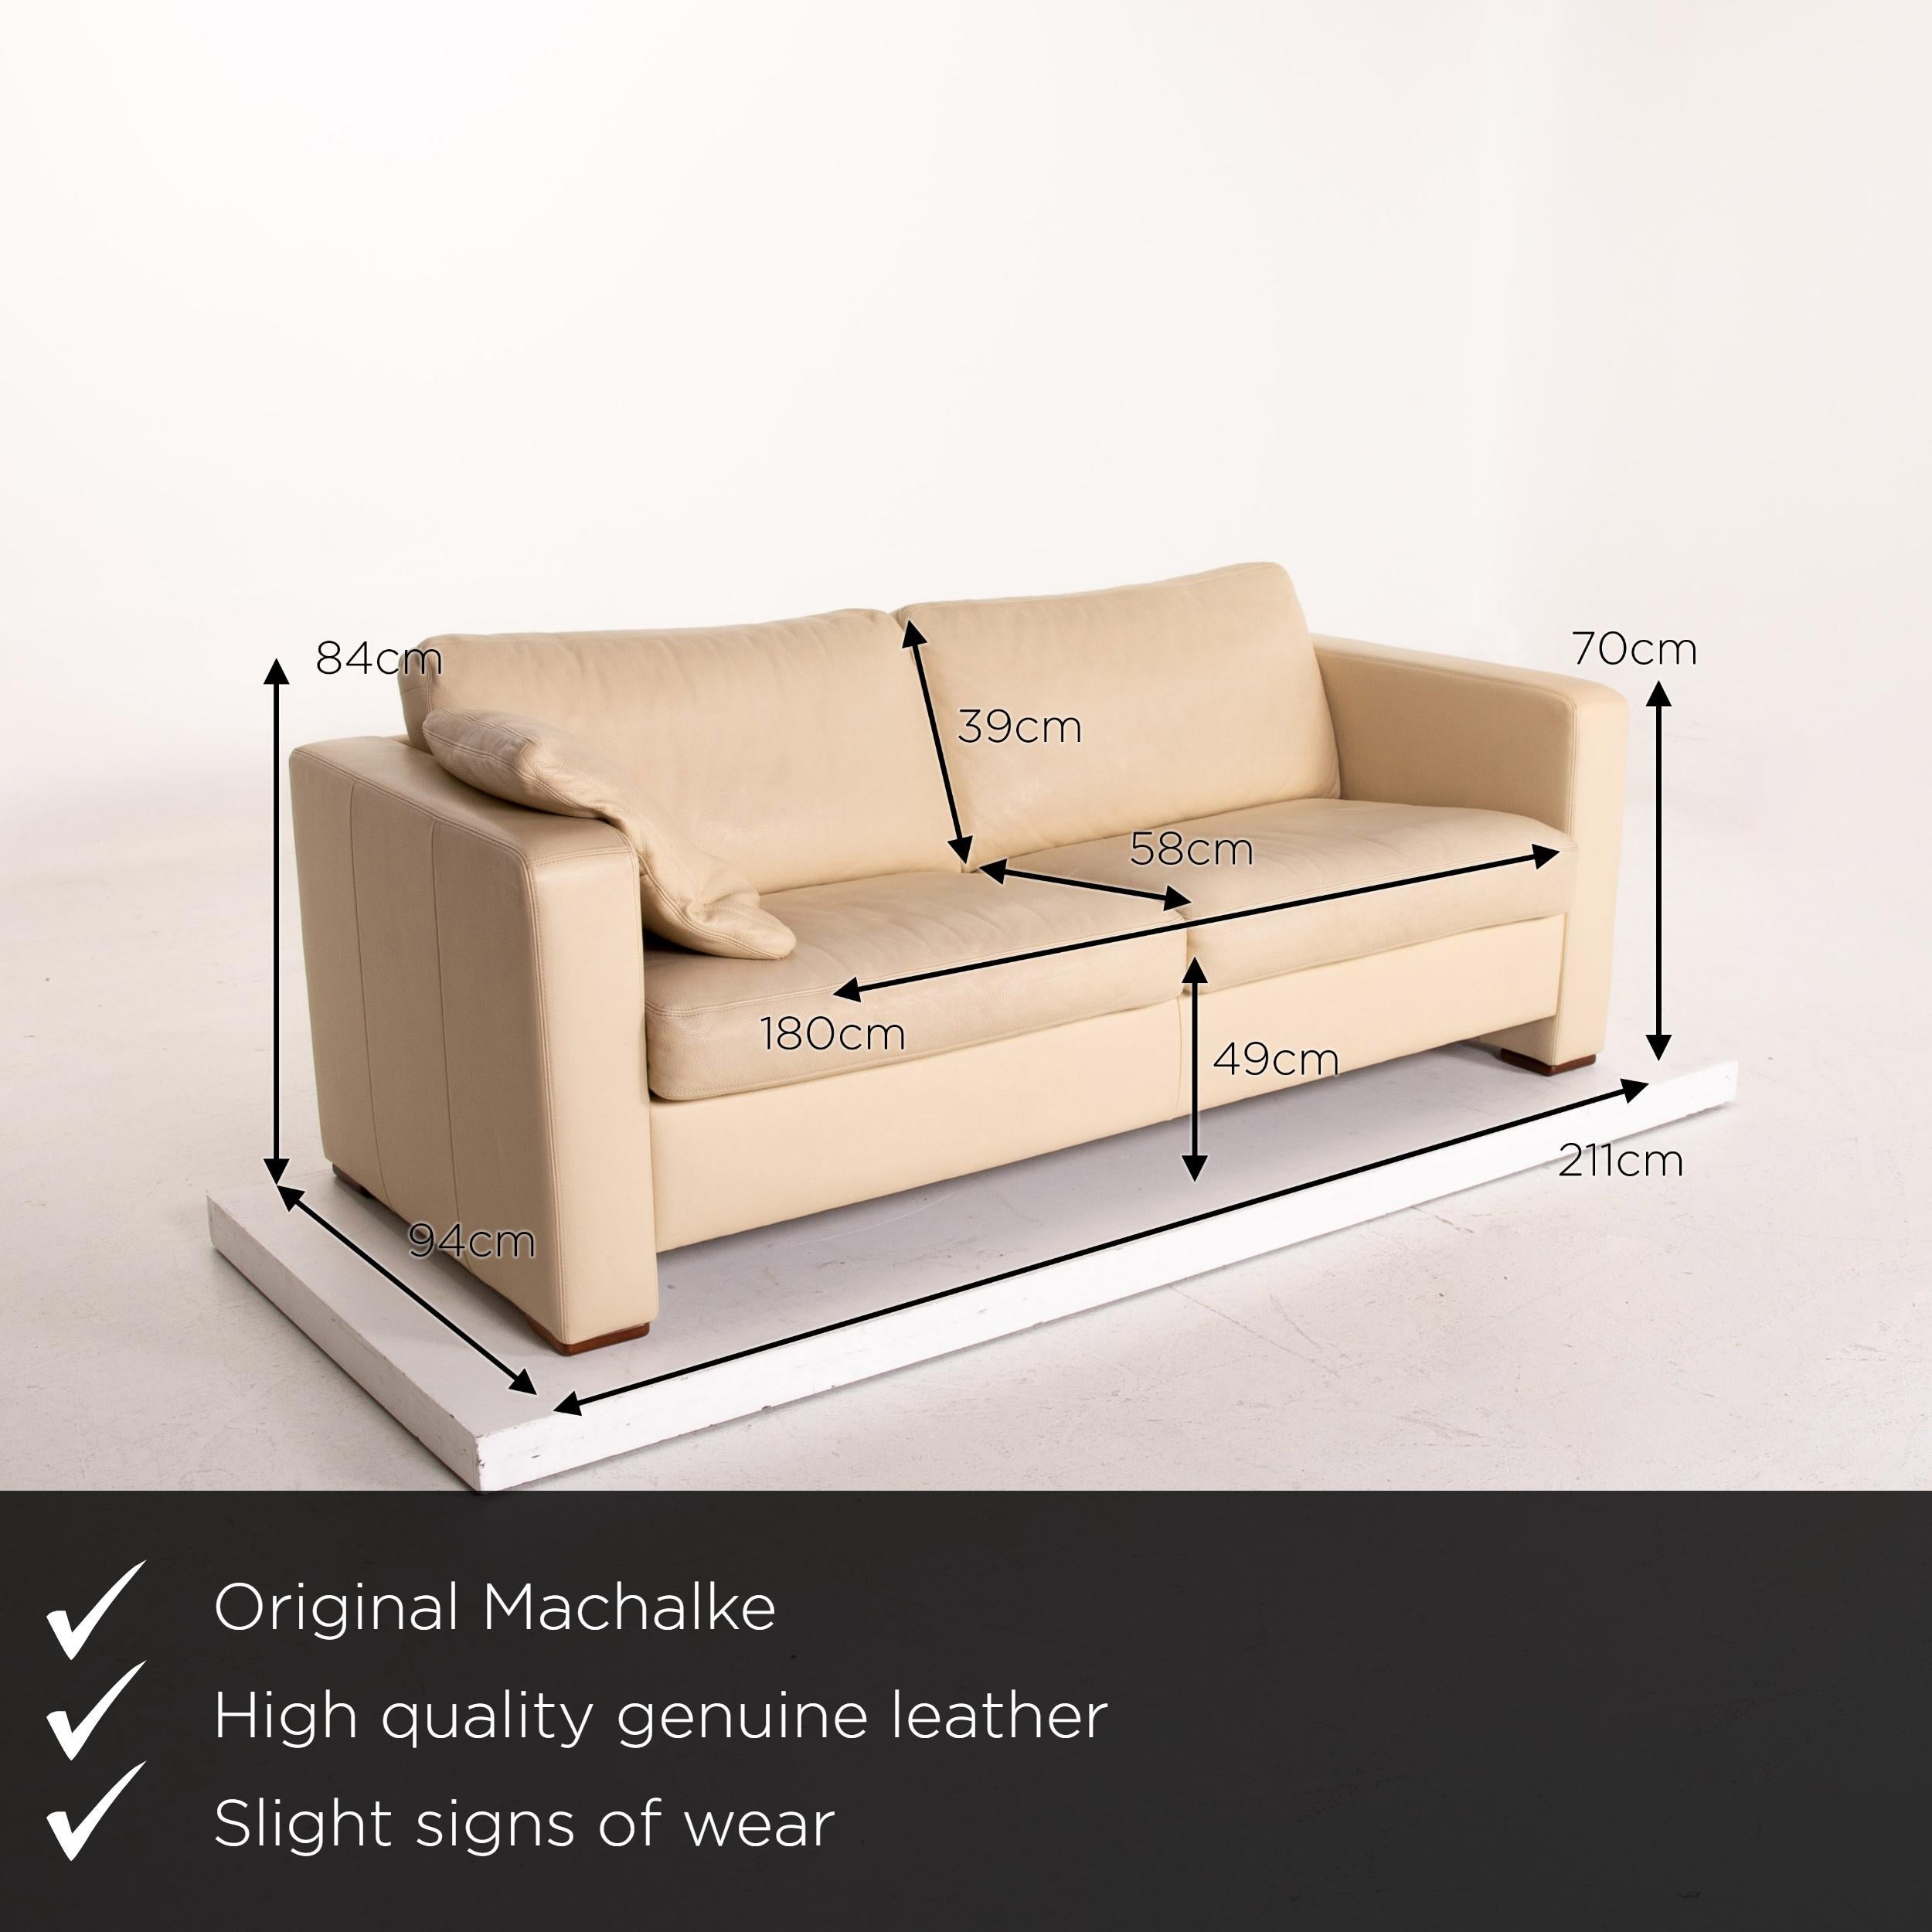 We present to you a Machalke leather sofa beige three-seat couch.

 

 Product measurements in centimeters:
 

Depth 94
Width 211
Height 84
Seat height 49
Rest height 70
Seat depth 58
Seat width 180
Back height 39.
 